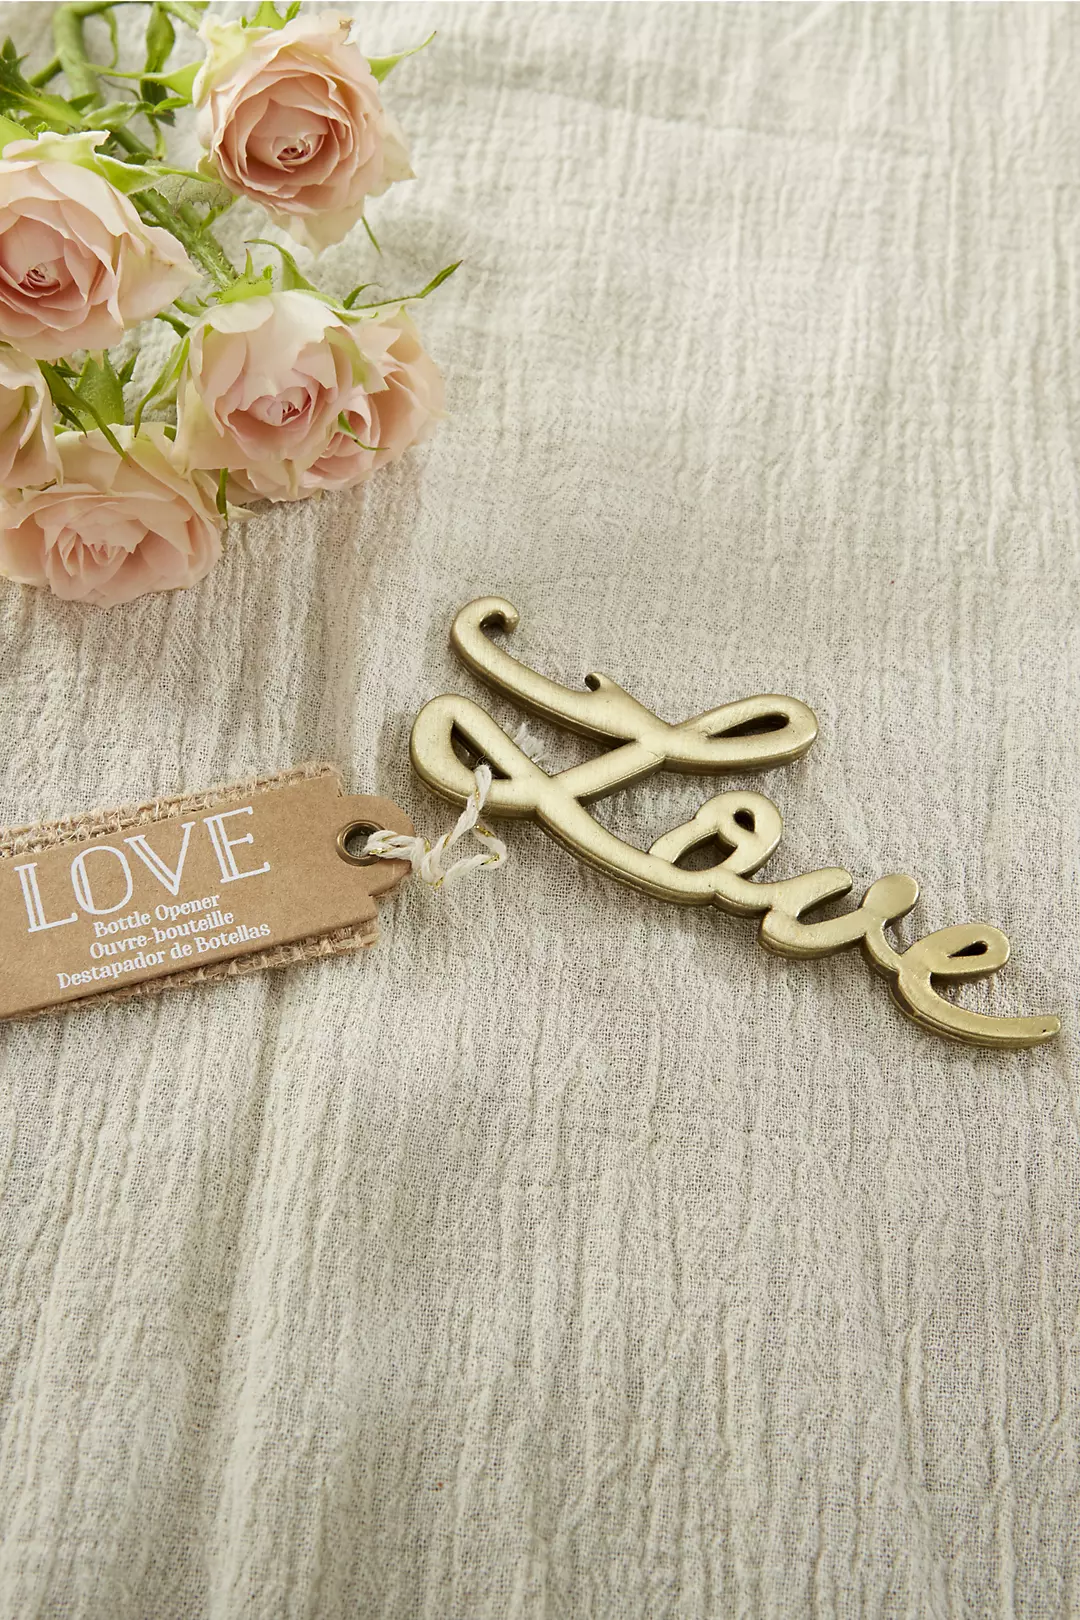 Love Antique Gold Bottle Openers Image